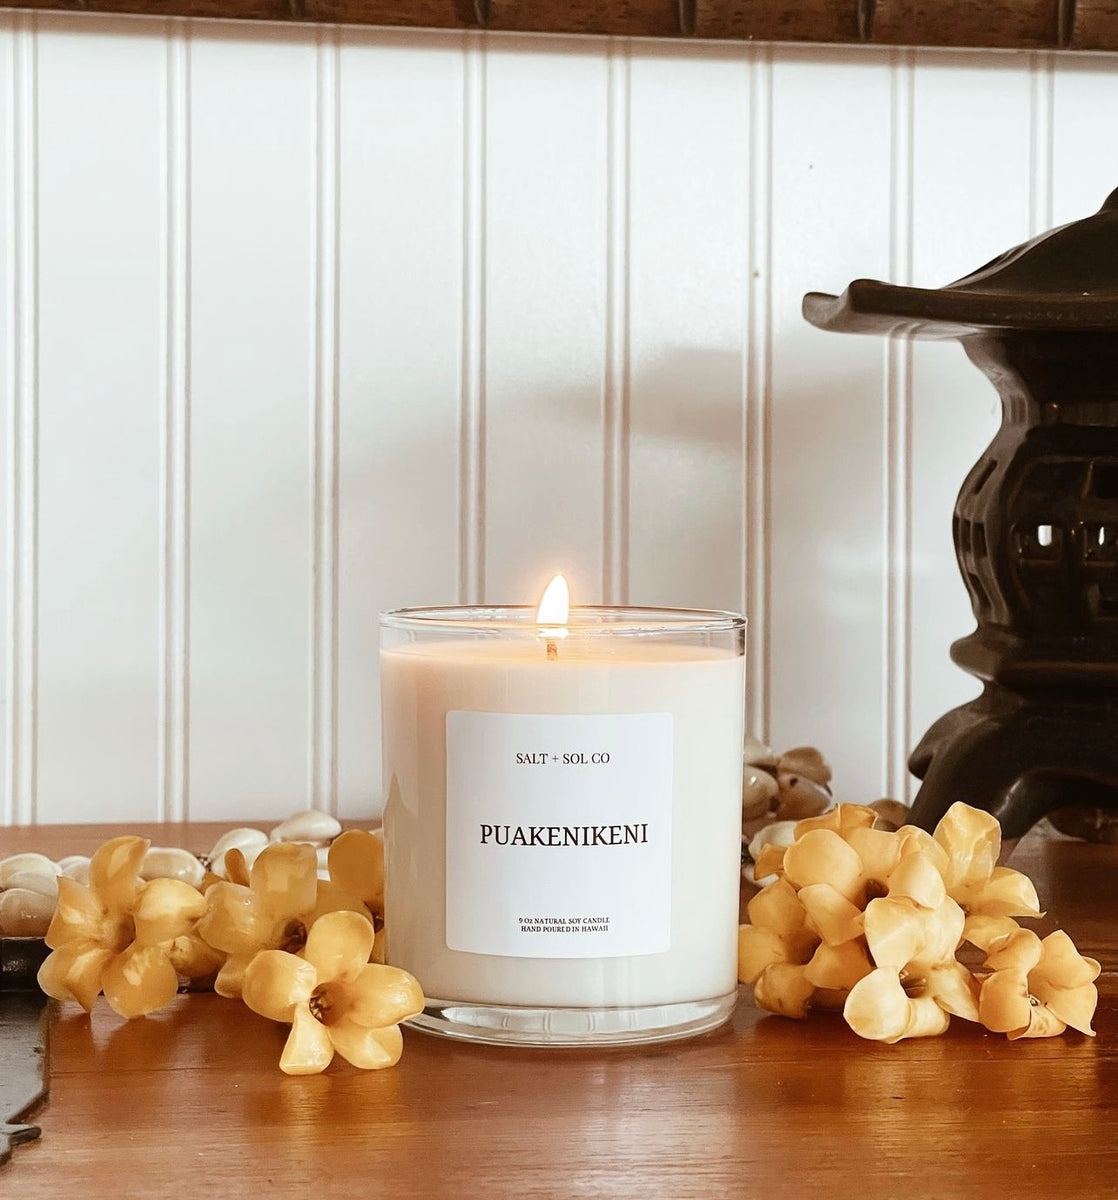 Shop Puakenikeni scented candles for sale at salt and sol co 